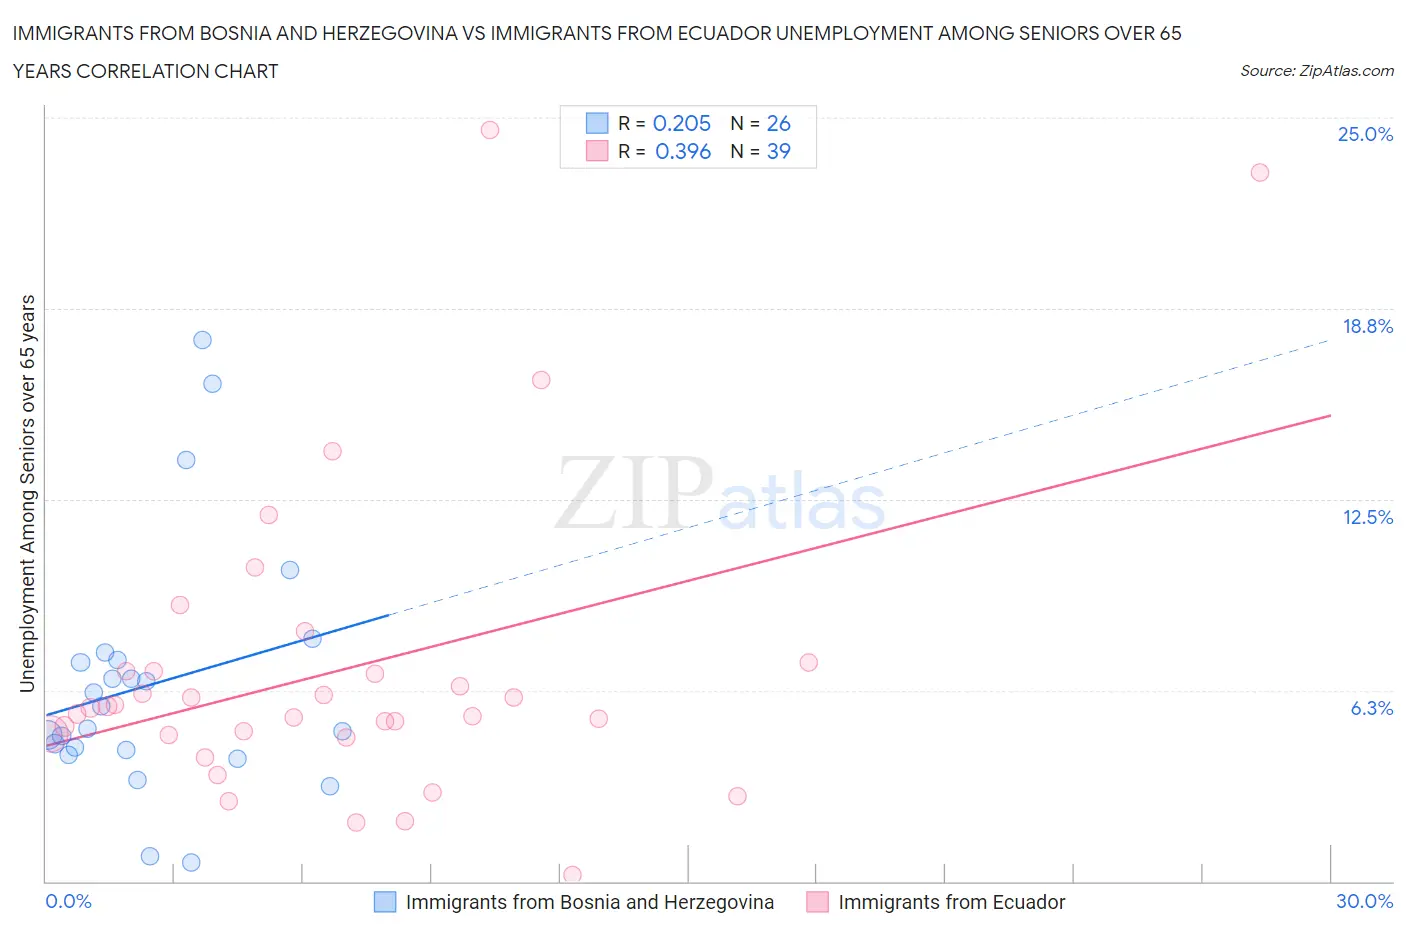 Immigrants from Bosnia and Herzegovina vs Immigrants from Ecuador Unemployment Among Seniors over 65 years